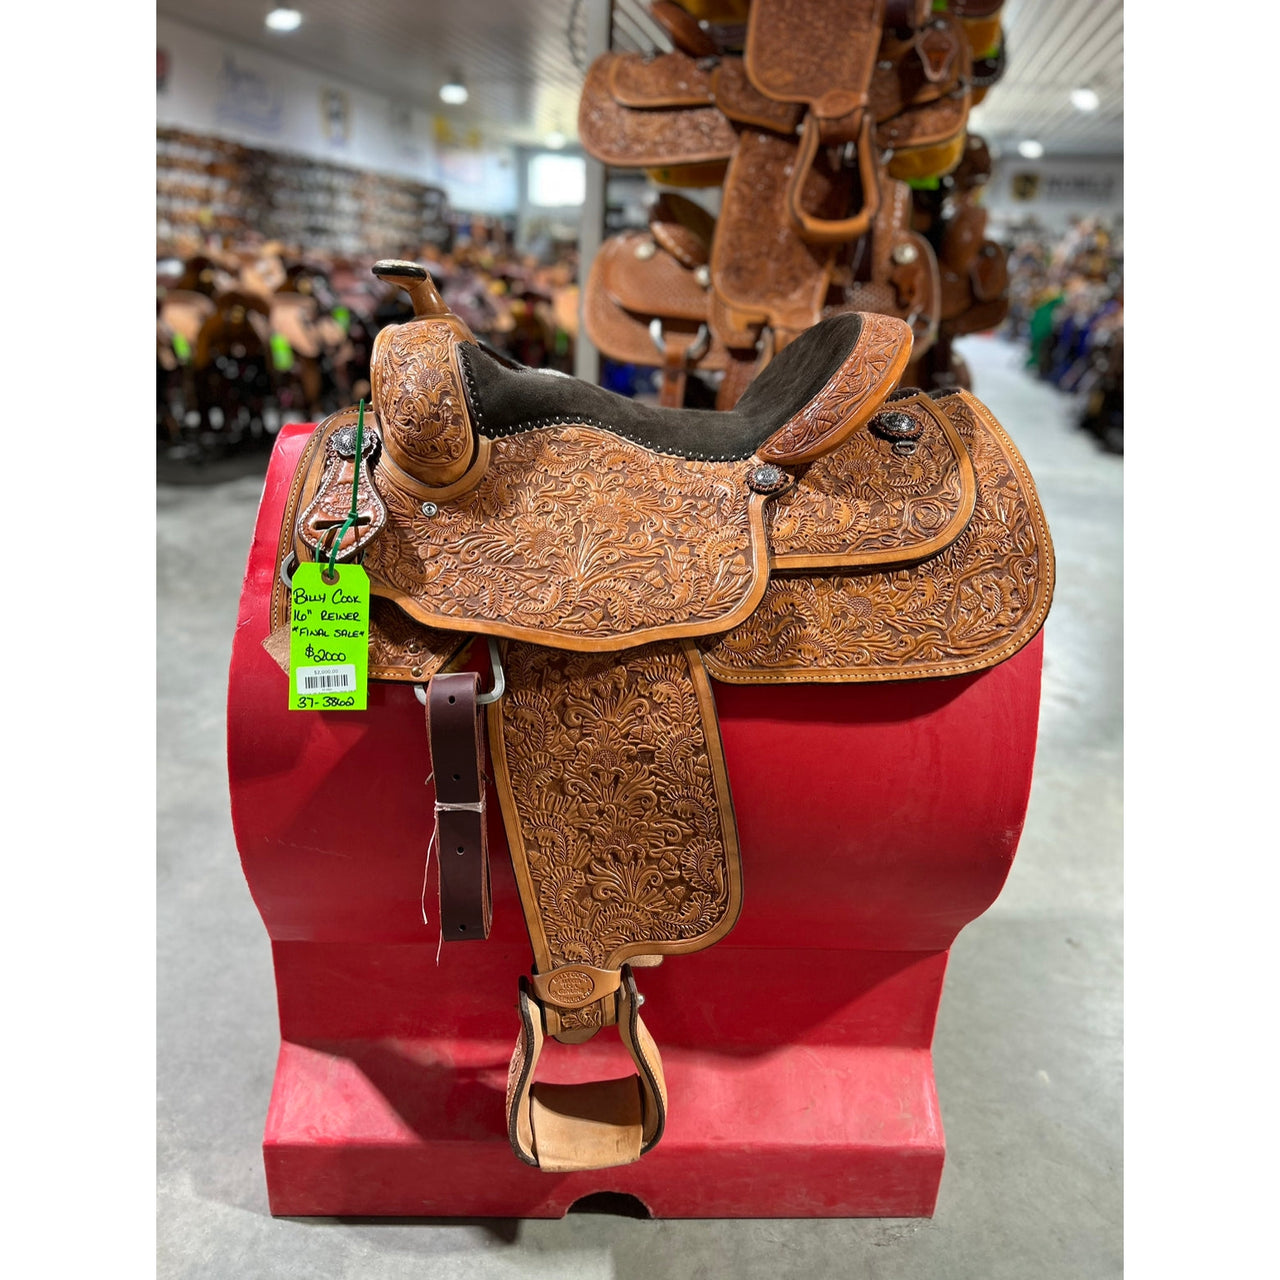 Billy Cook  16"  Reining Saddle - FINAL SALE